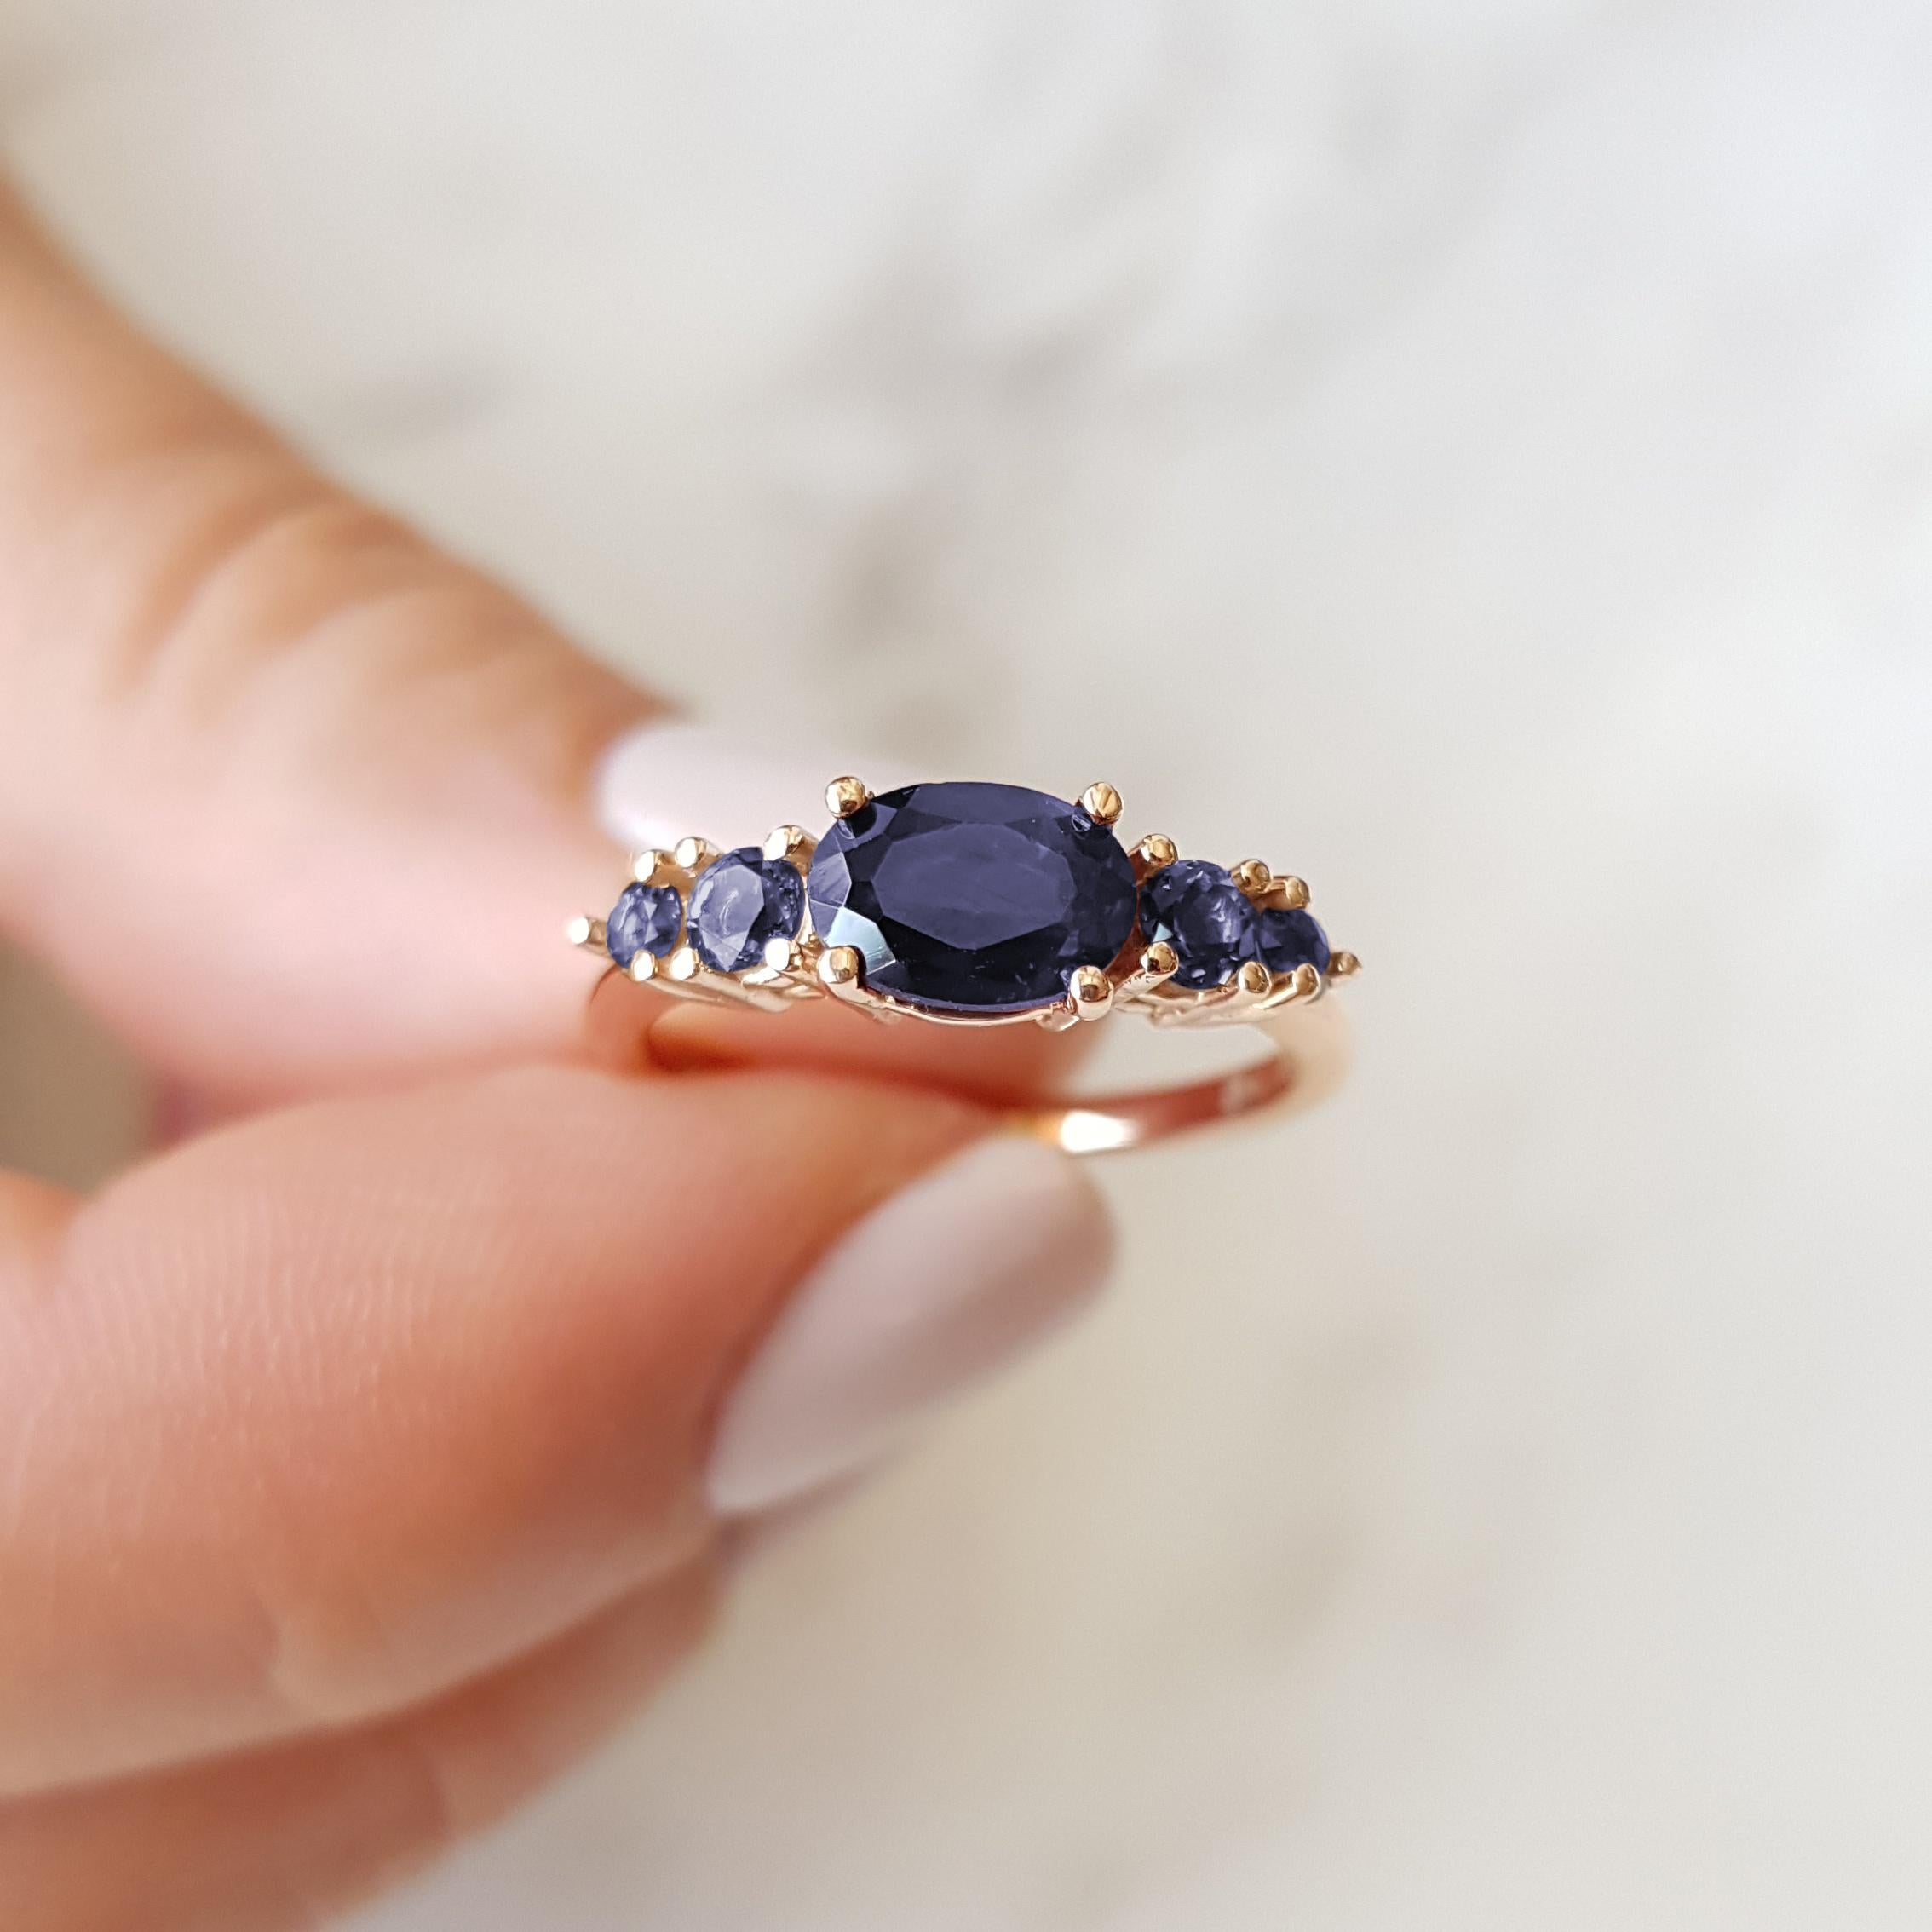 MADE TO ORDER *Please note that we take 45 business days to create your jewel before its ready to ship.  

A 14K rose gold ring perfectly matching Iolites. 

Genuine Gemstones: Iolites (round), Iolite (oval)

The perfect and unique ring to give to